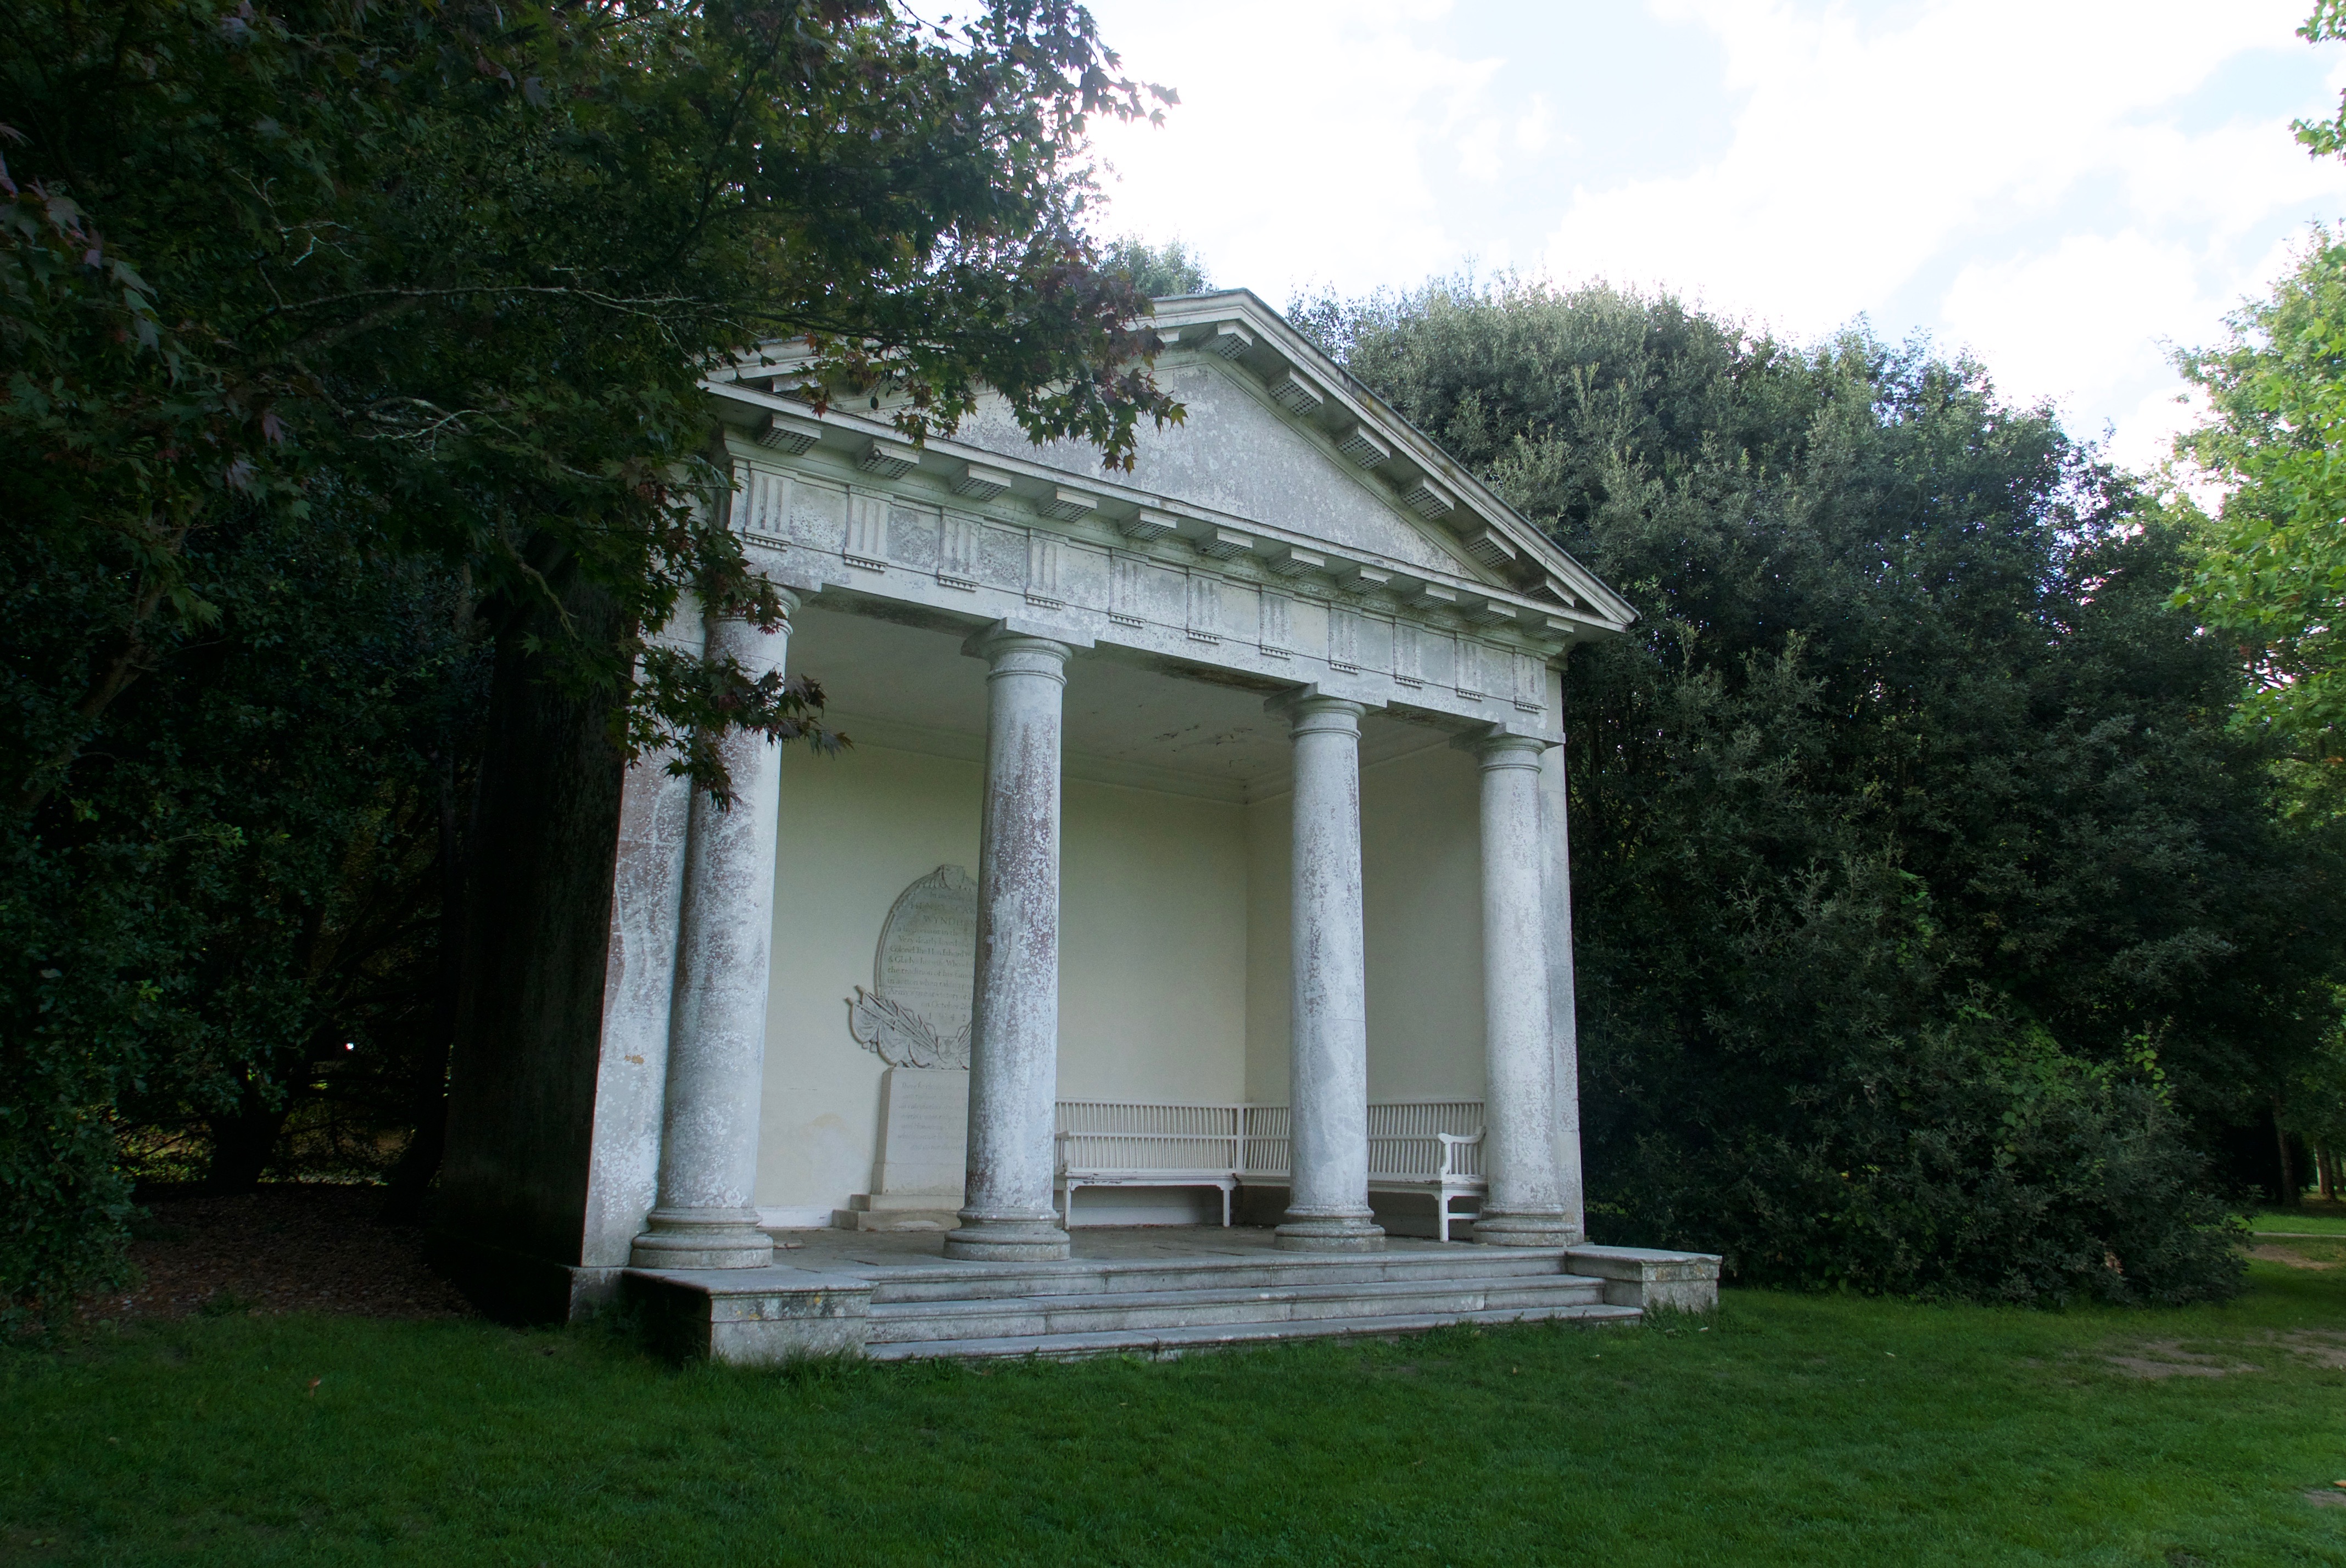 From this Doric temple, the view over the countryside is pure pastoral.